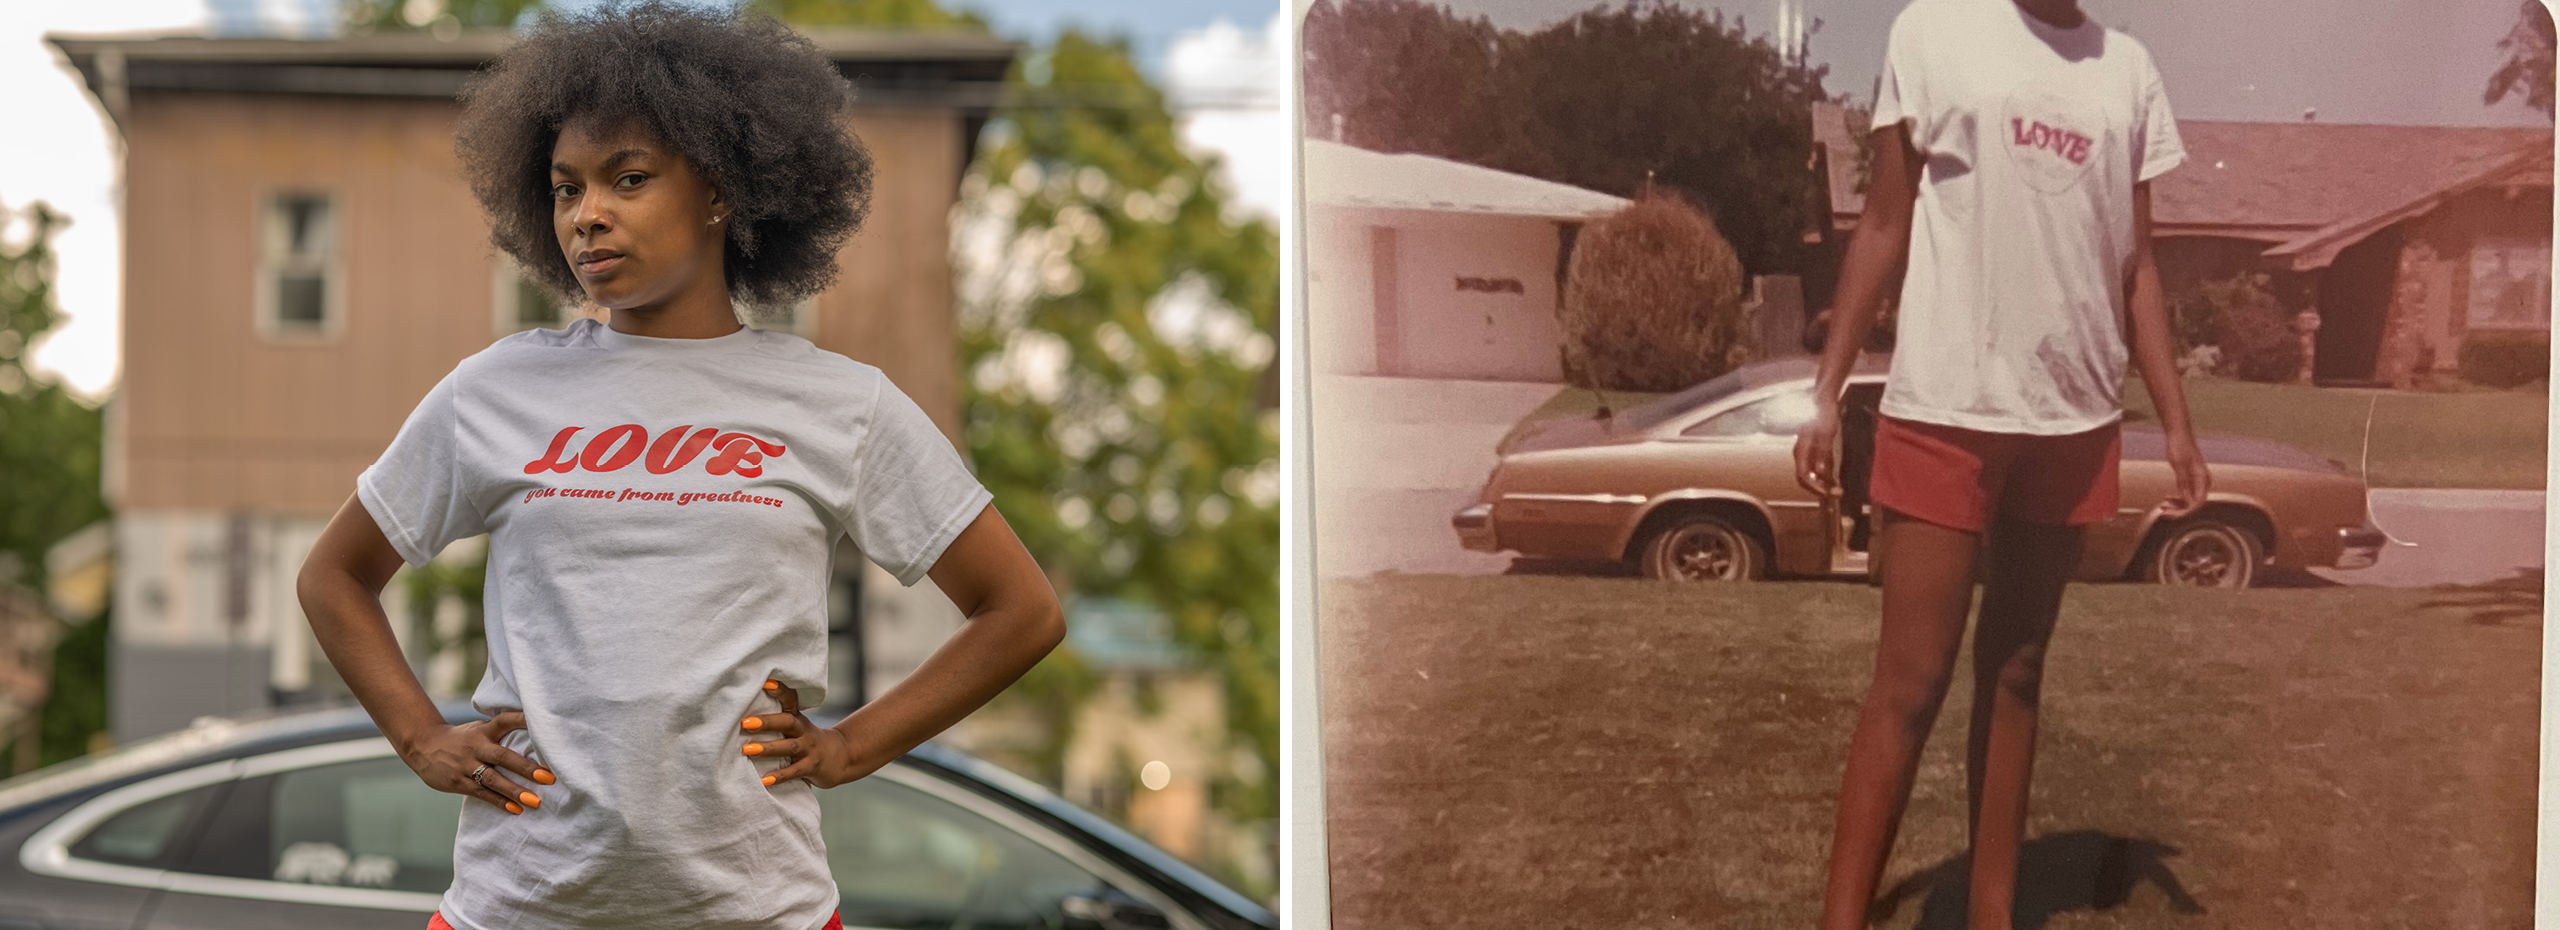 Side by side photographs of young Black women posing outside in front of cars and wearing t-shirts with the word love